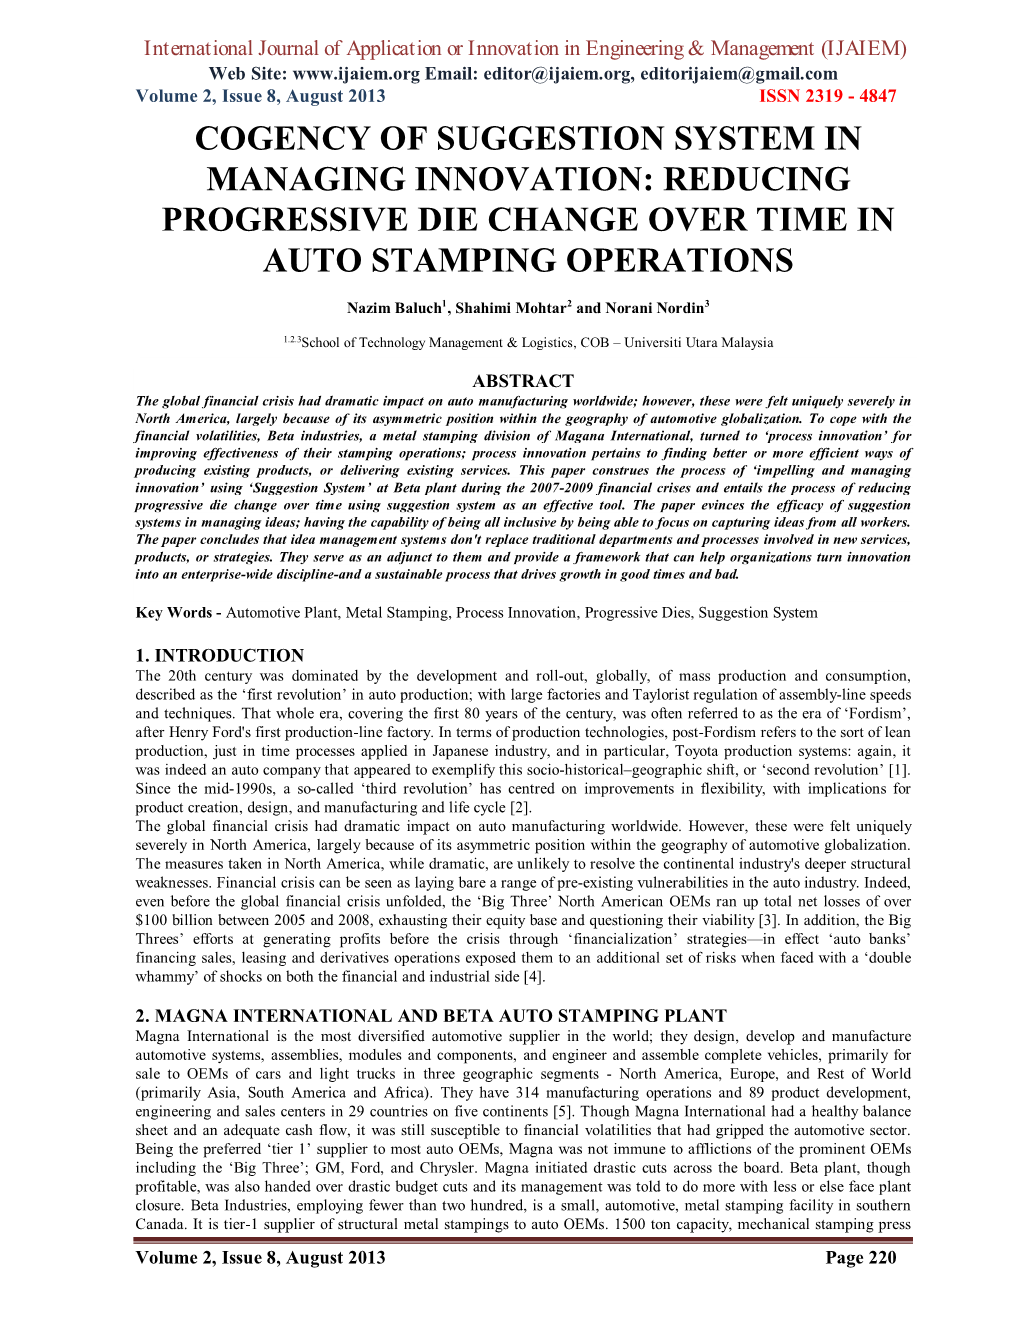 Cogency of Suggestion System in Managing Innovation